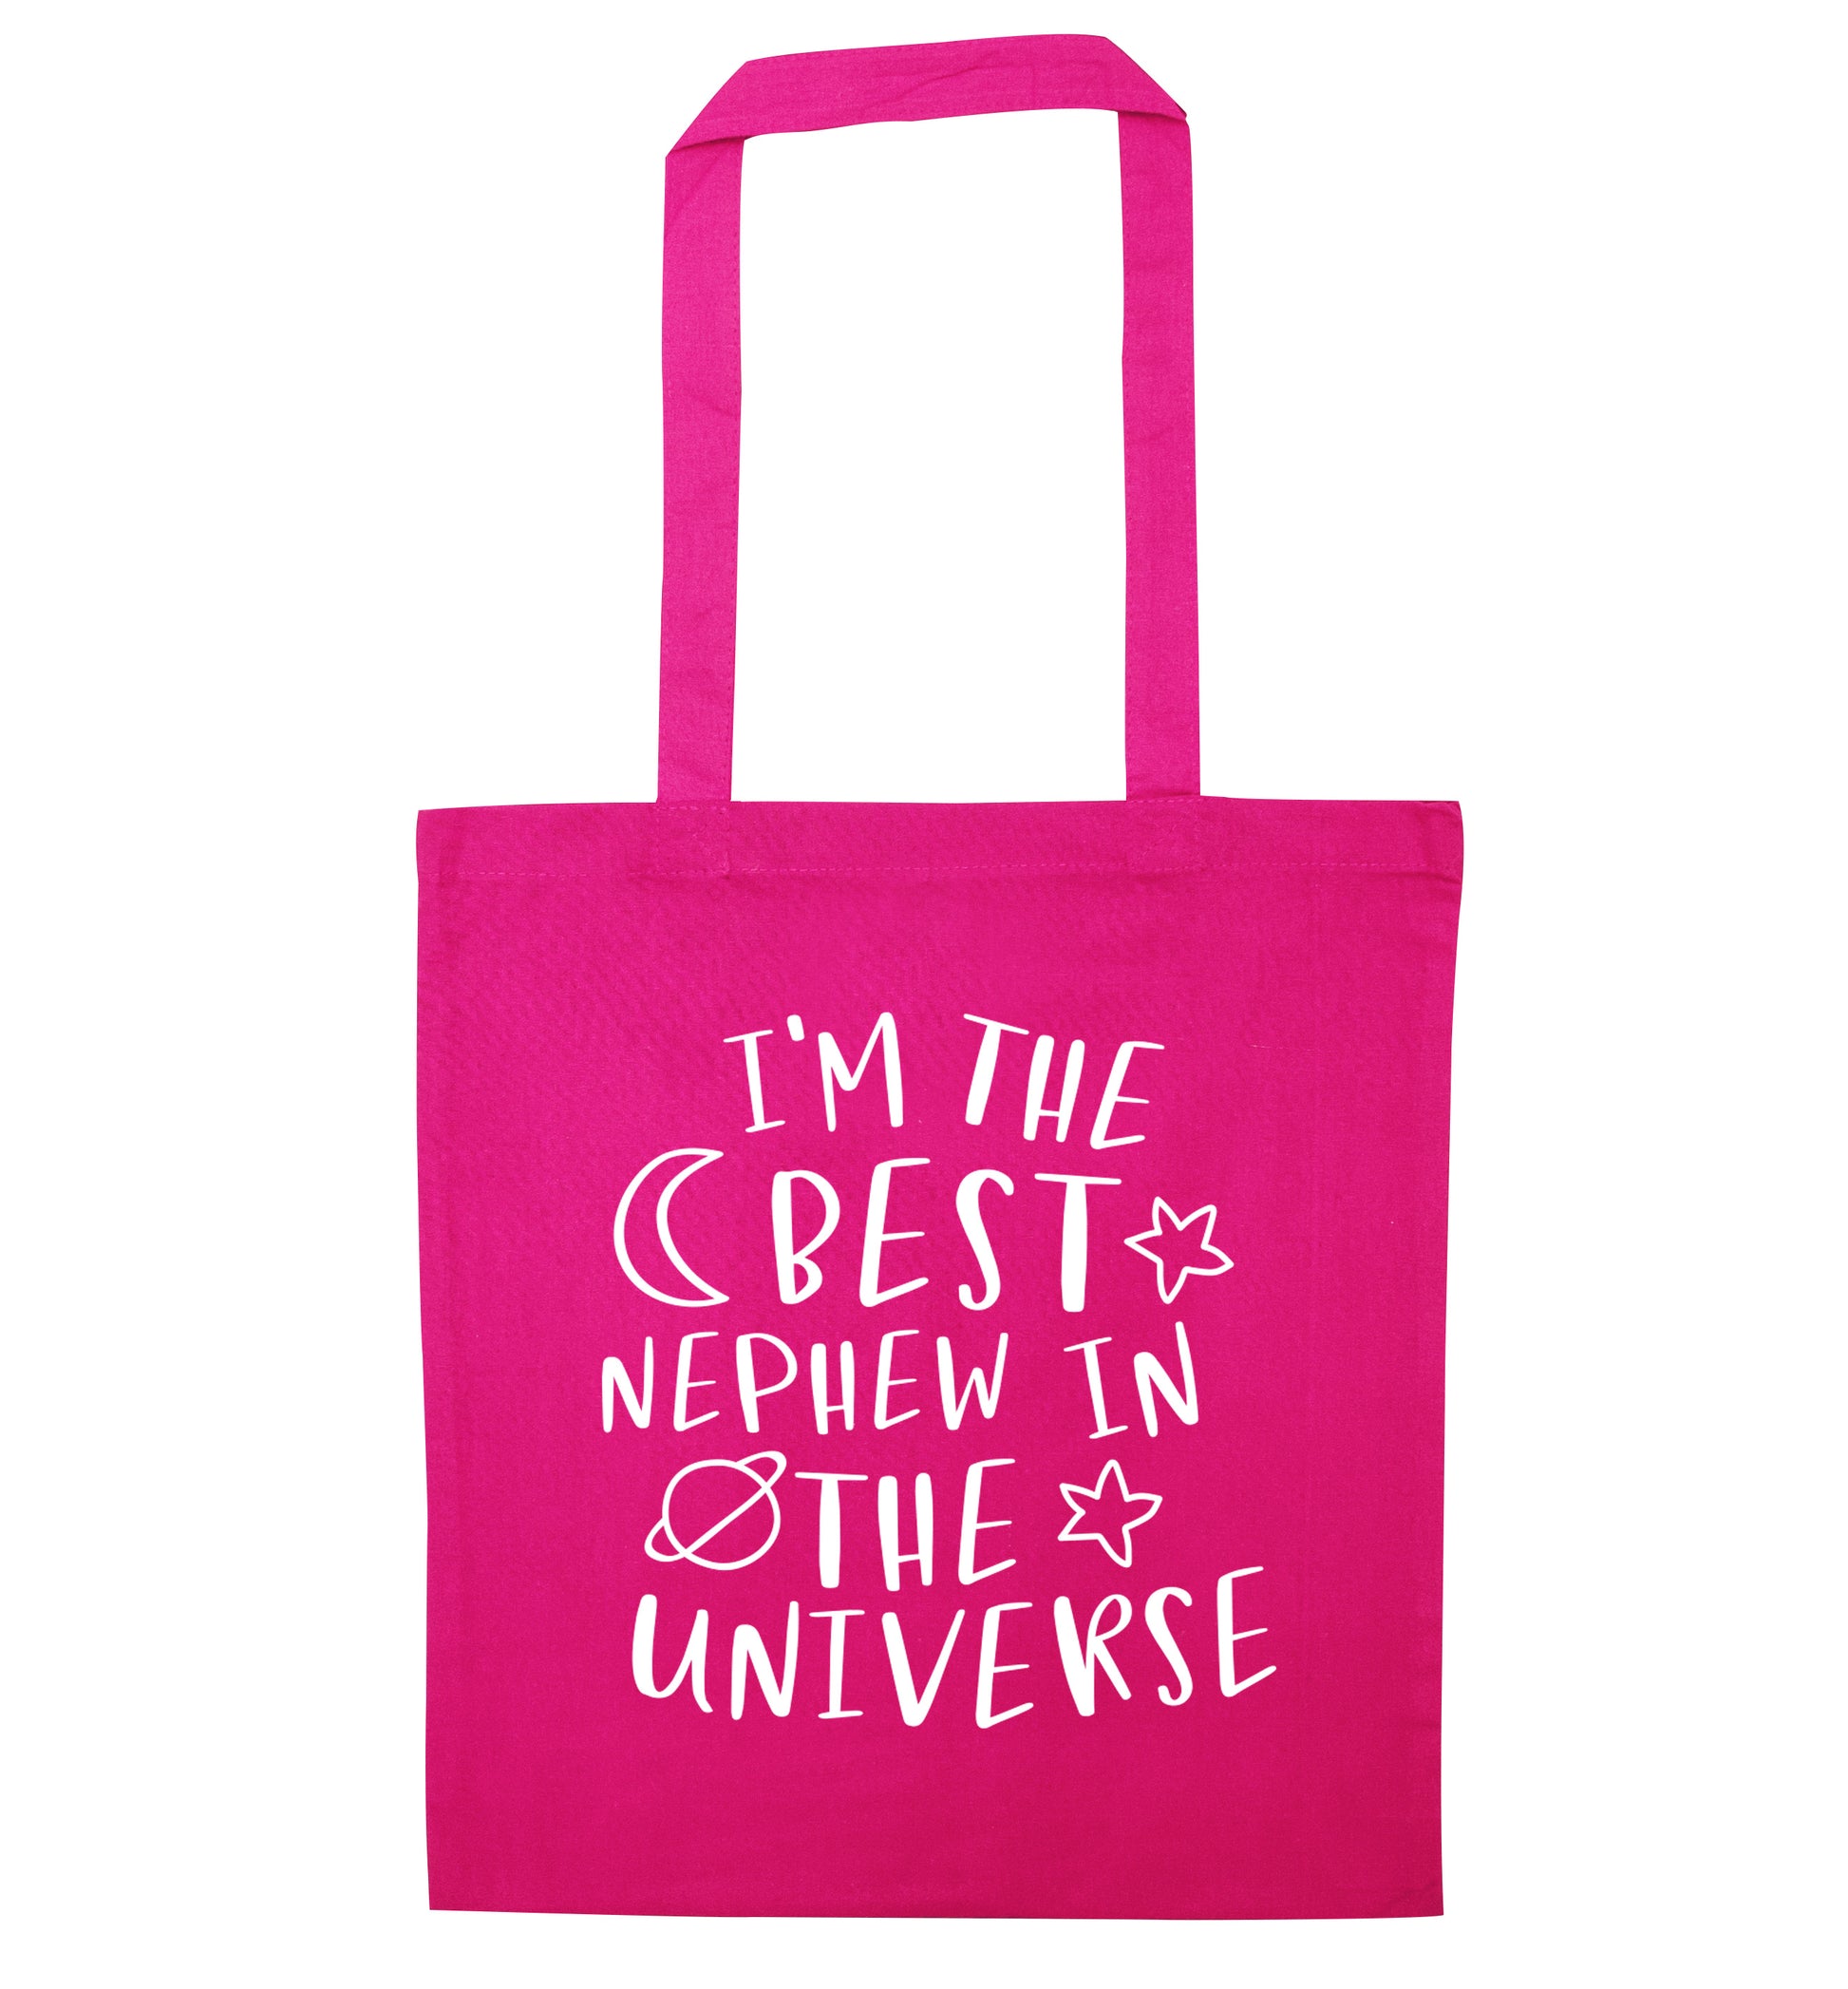 I'm the best nephew in the universe pink tote bag